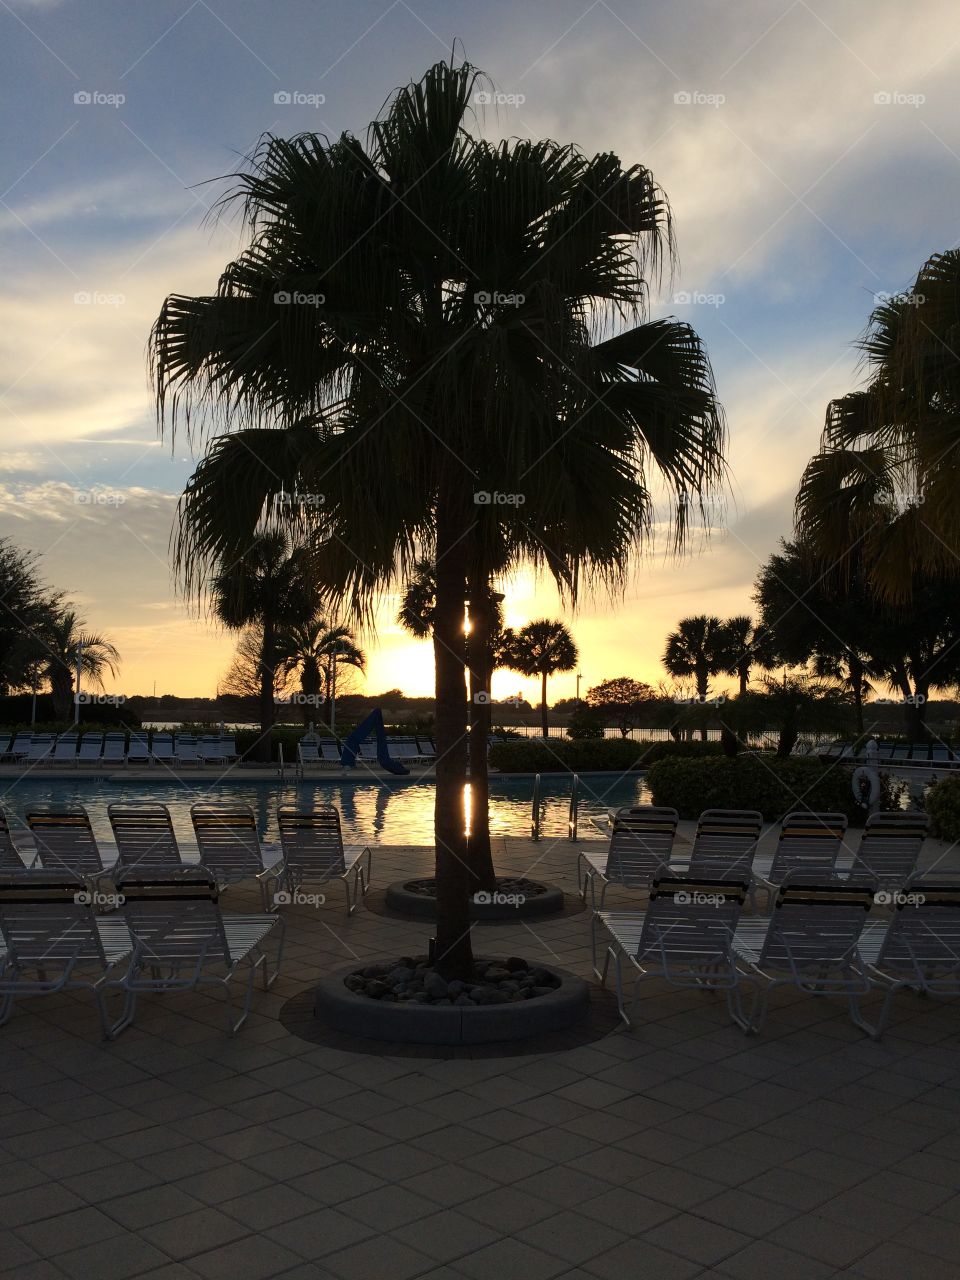 Paradise by the pool. Palmtree by a resort pool while the sun sets